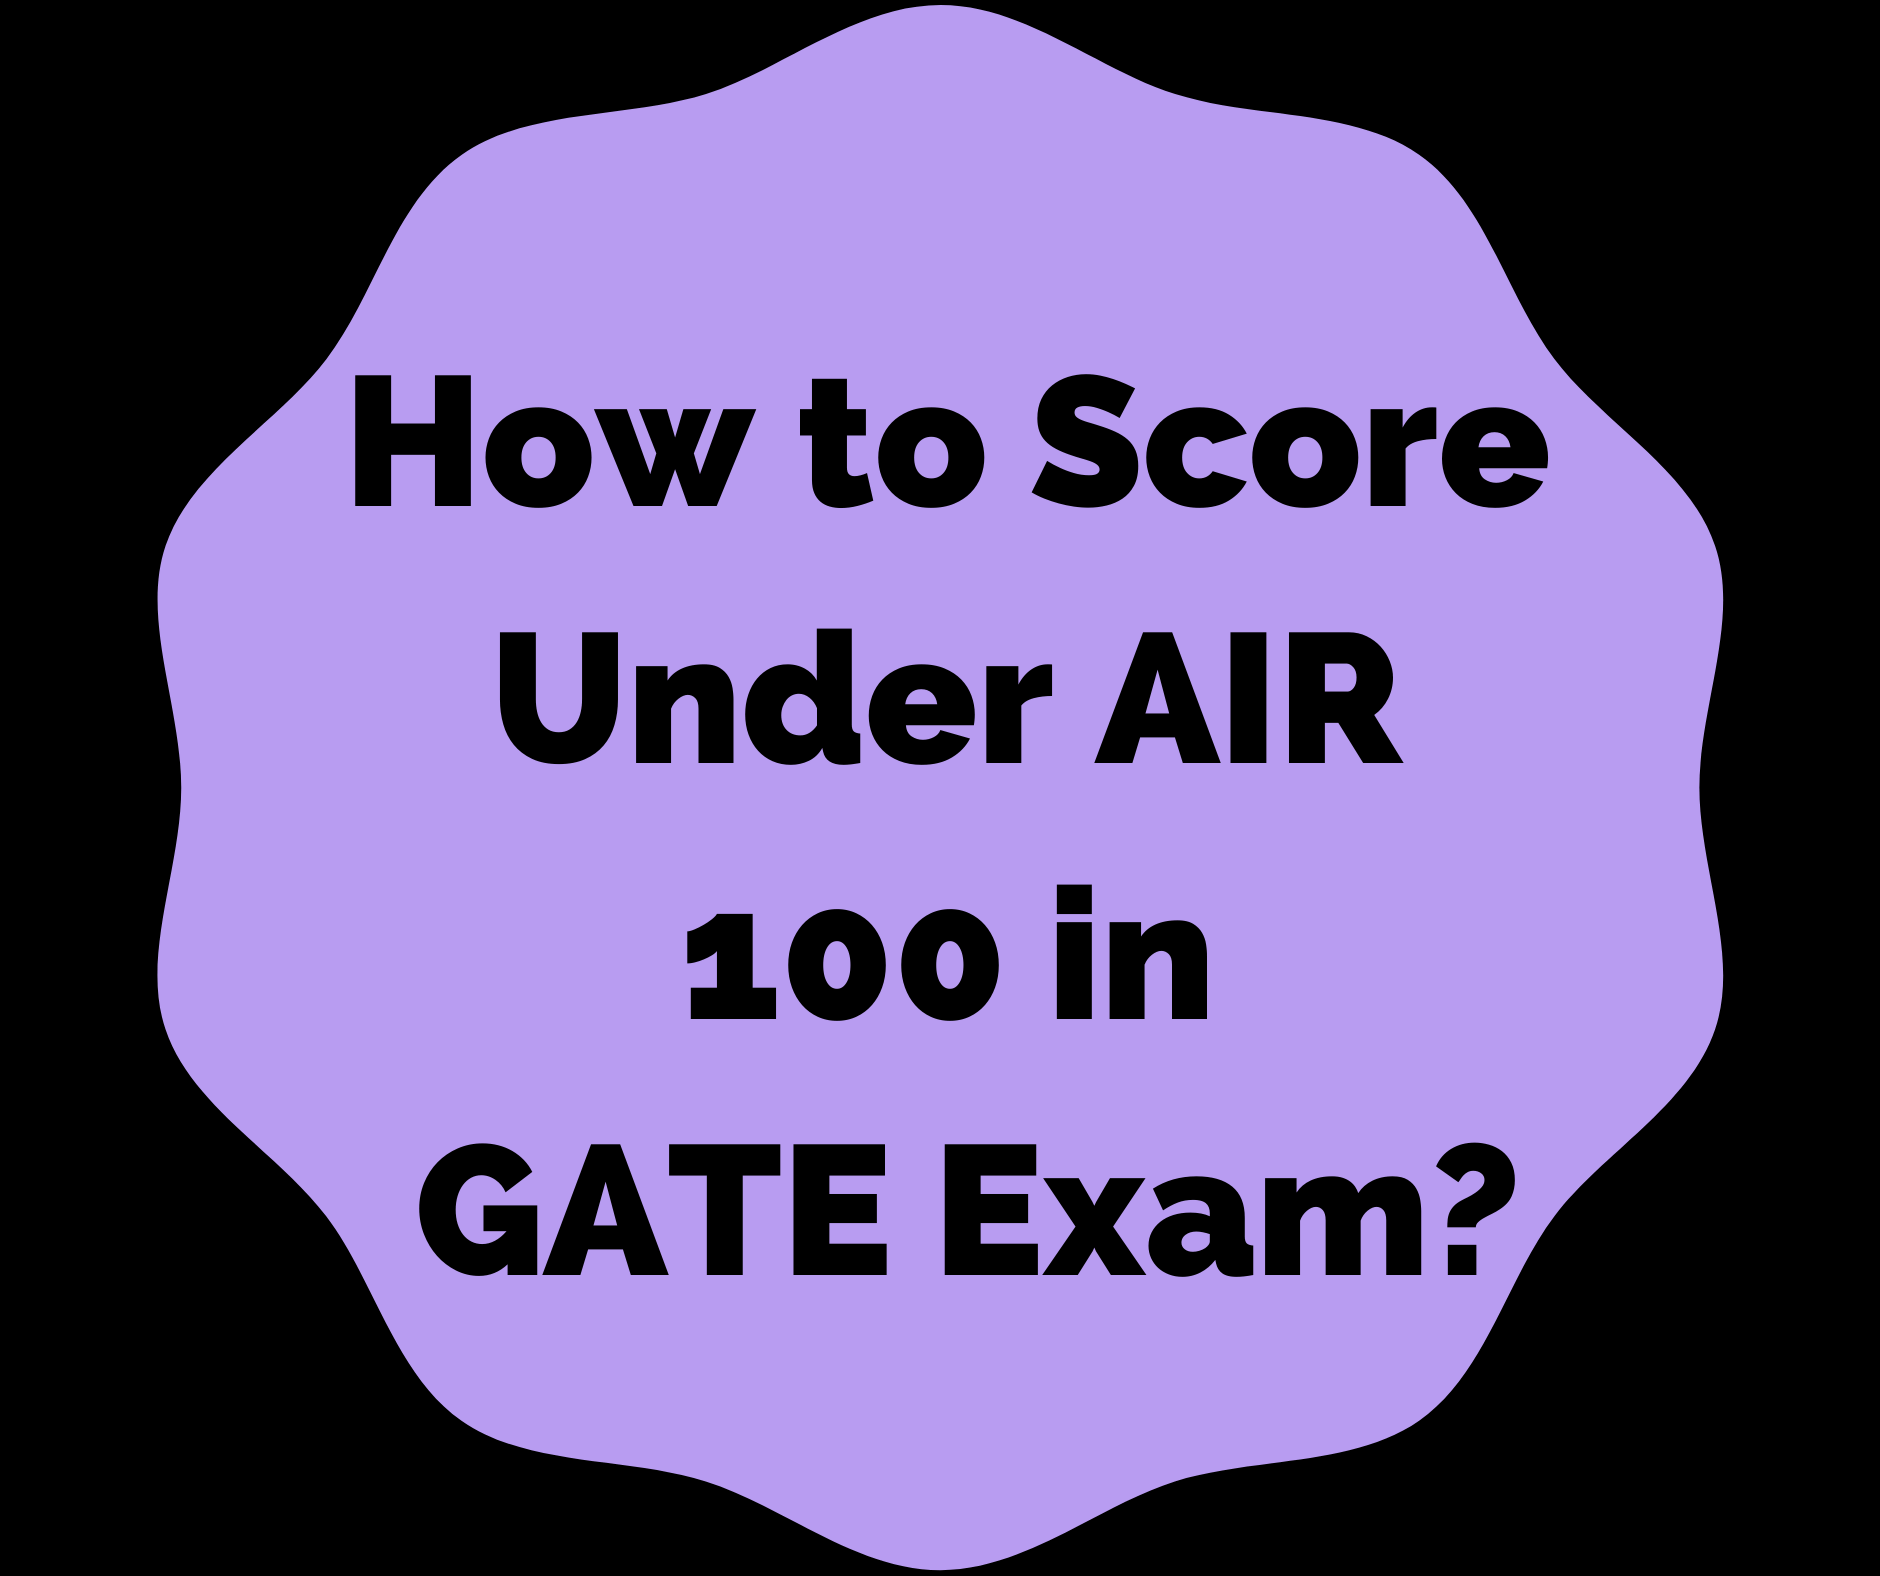 How to Score Under AIE 100 in GATE Exam